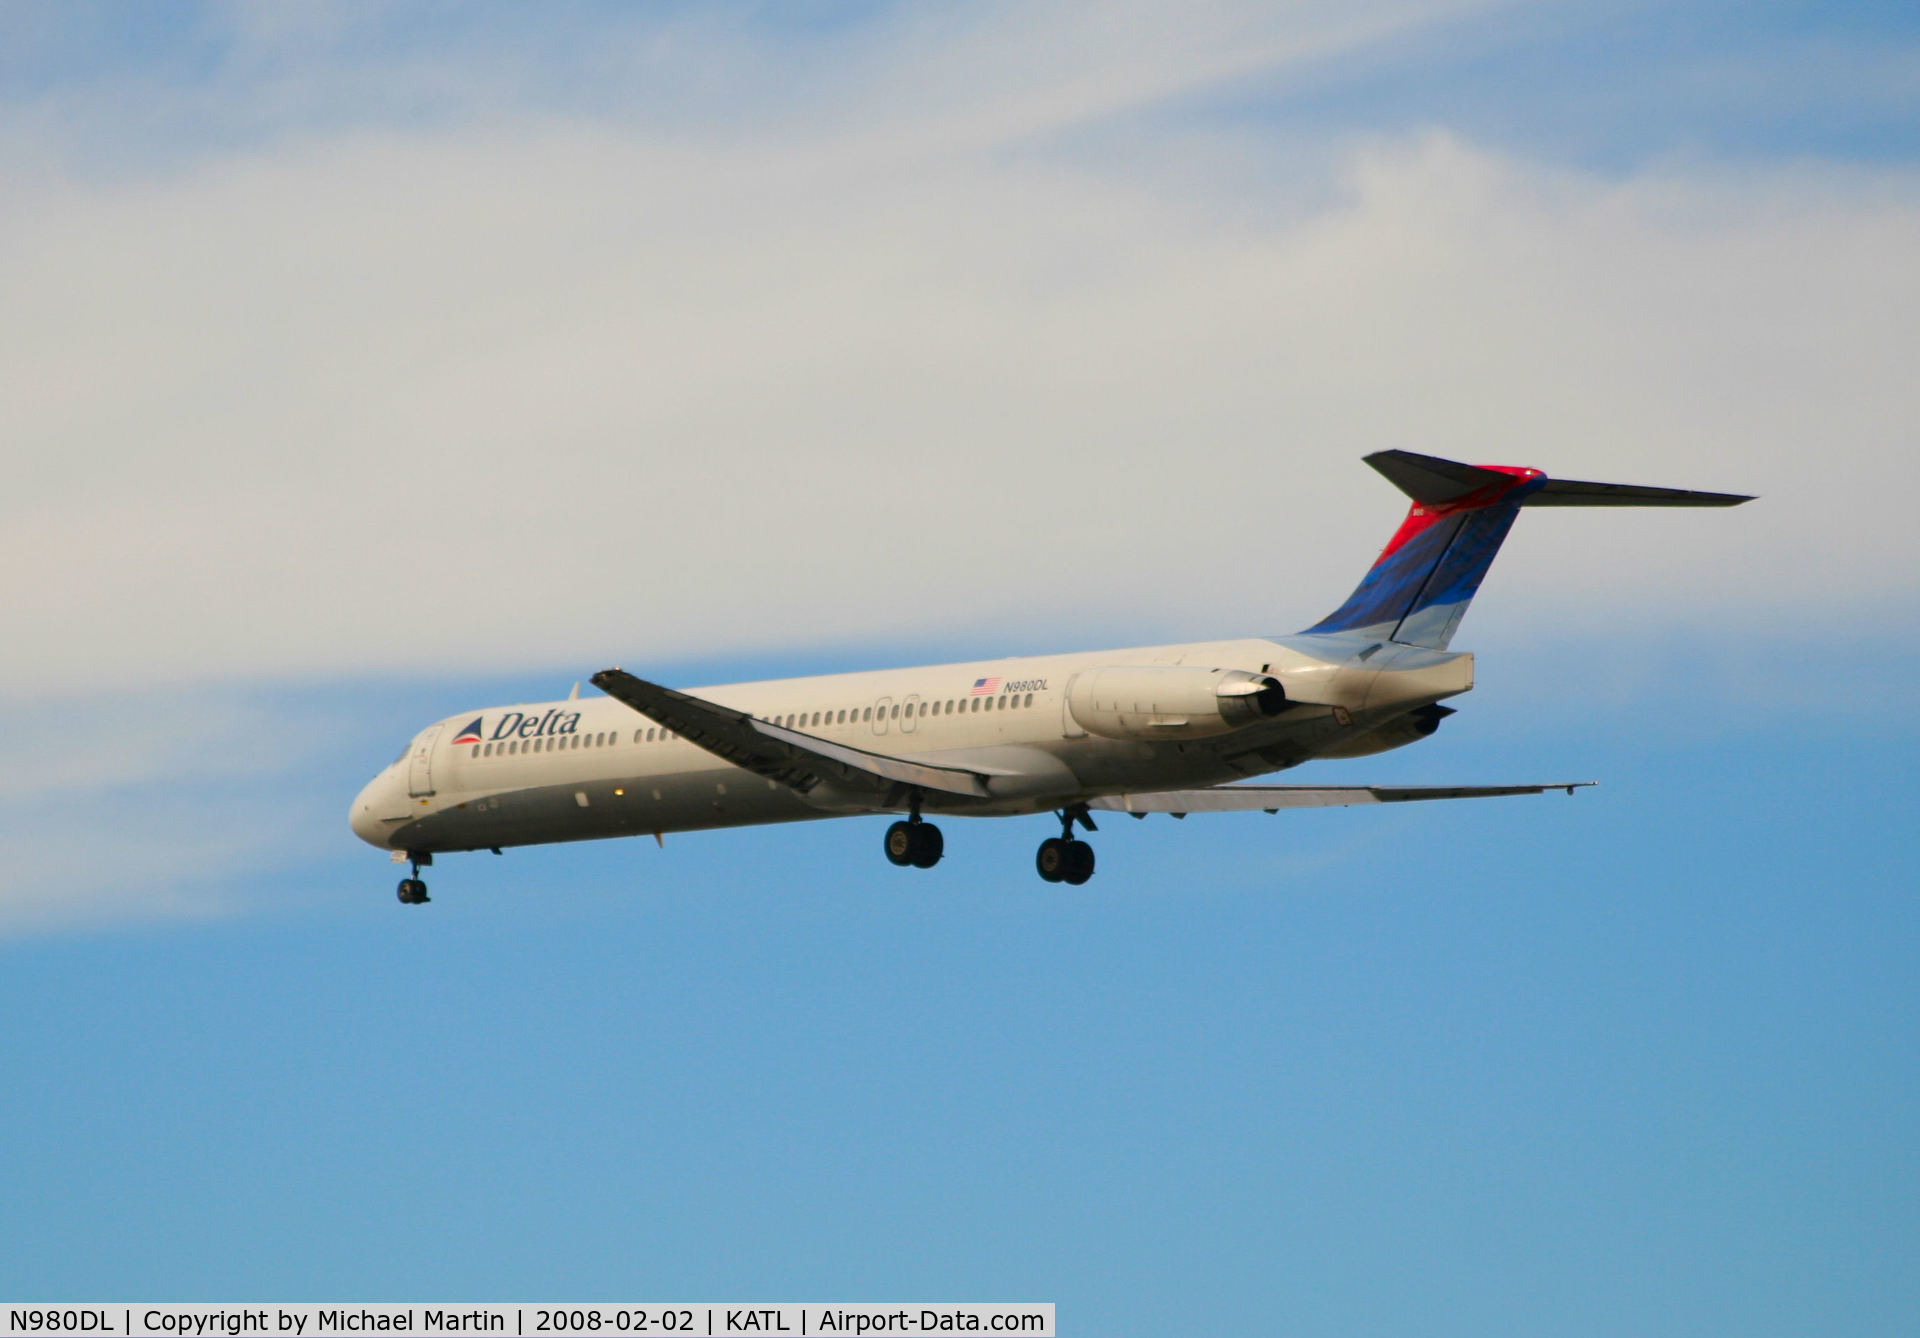 N980DL, 1991 McDonnell Douglas MD-88 C/N 53267, Over the numbers of 26R